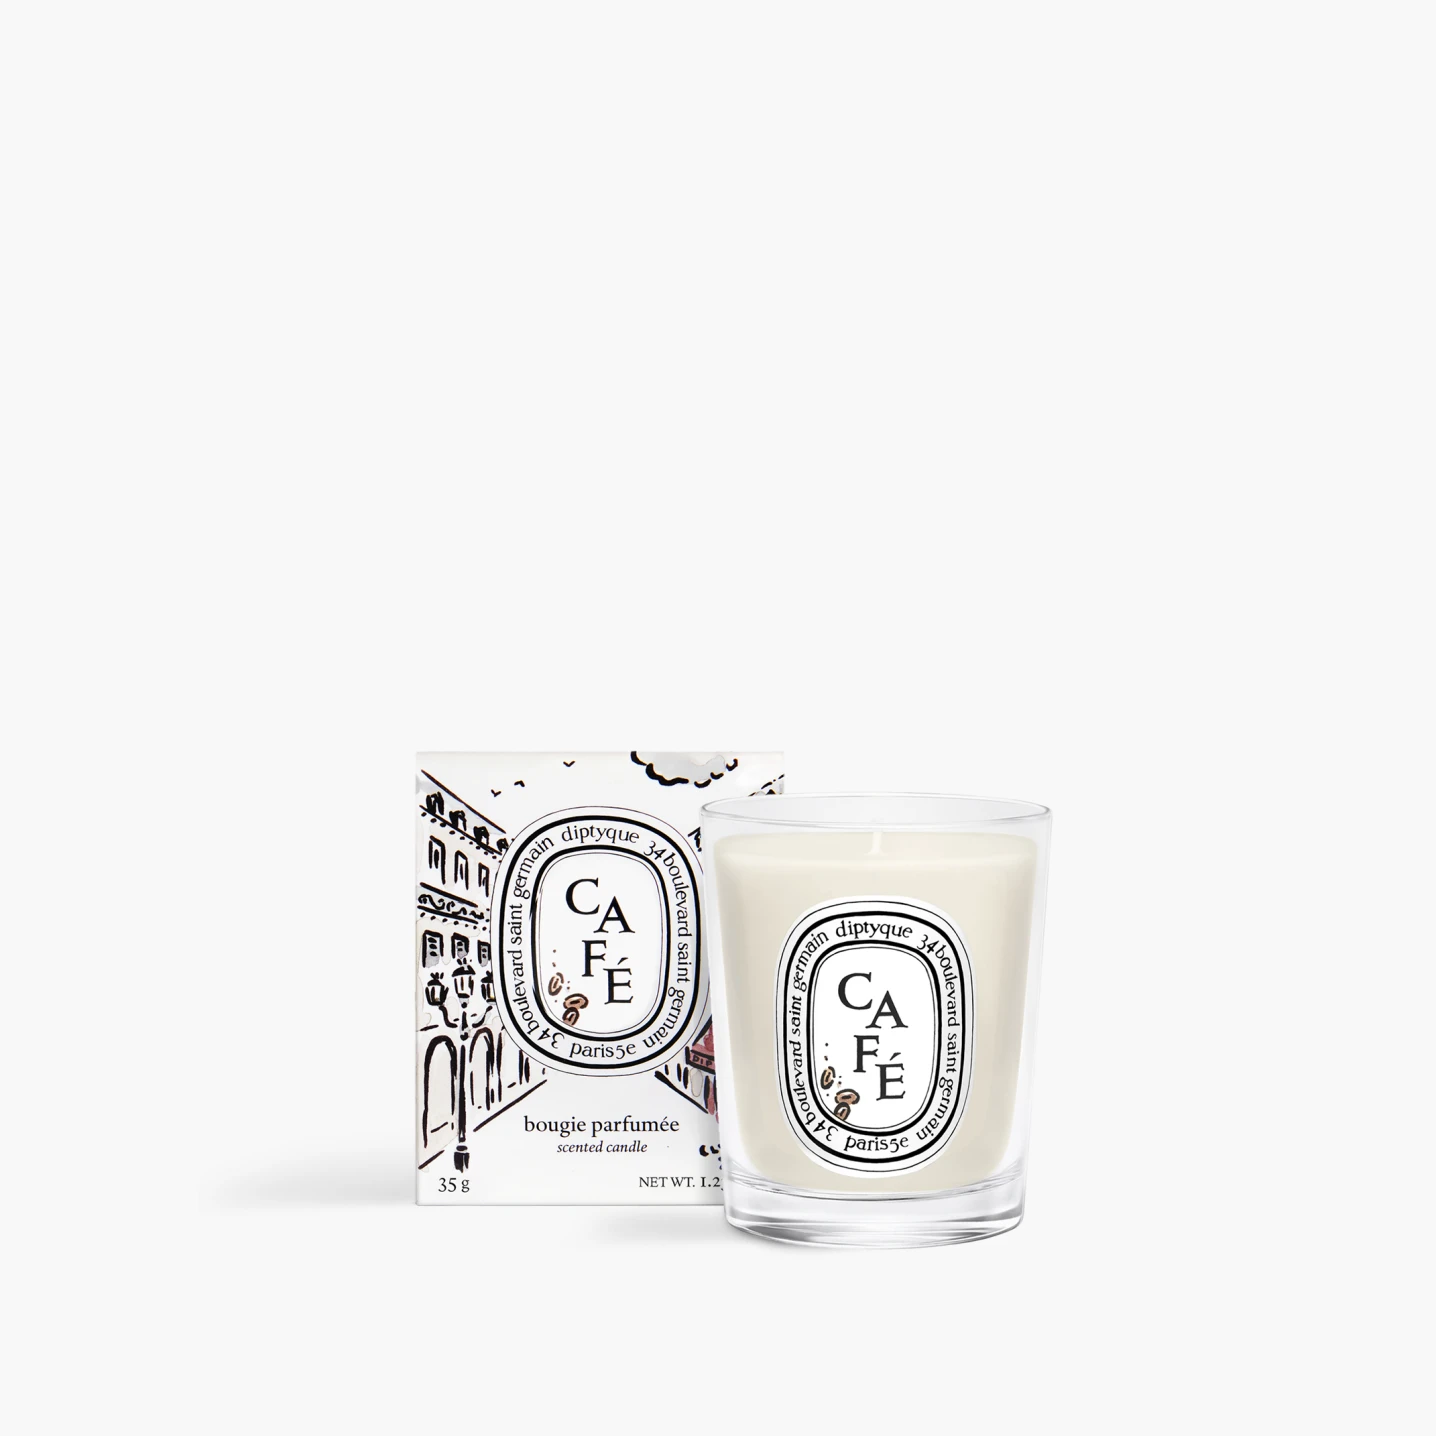 YOUR DIPTYQUE GIFT​